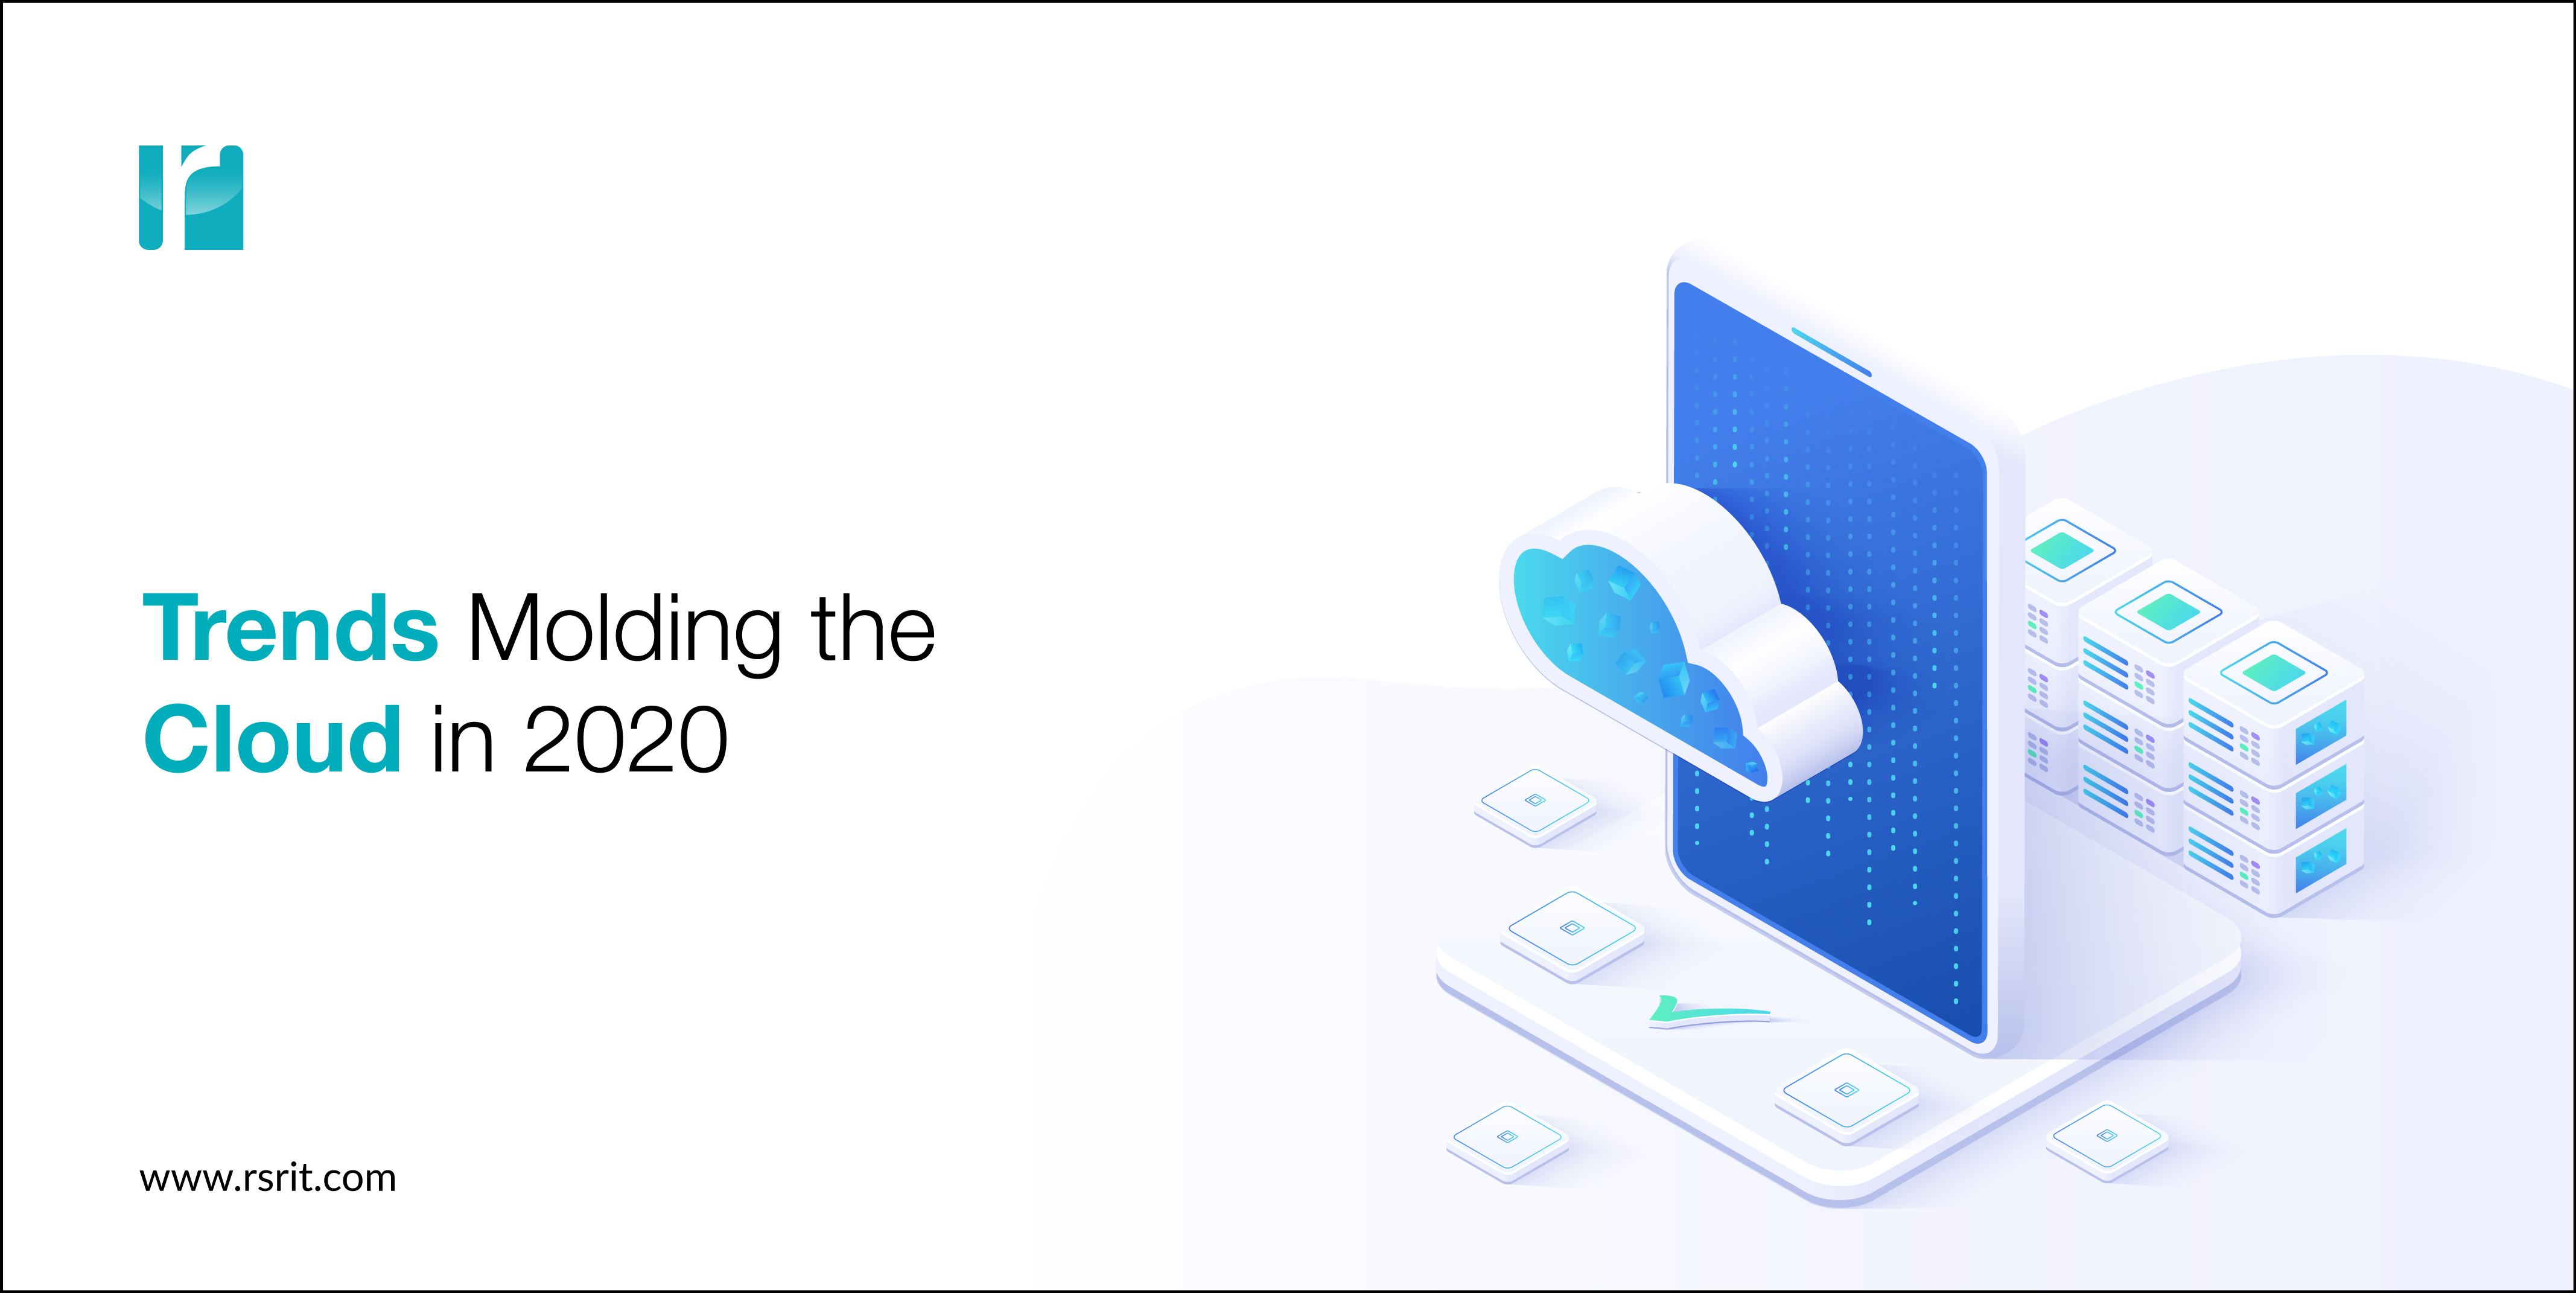 Trends Molding the Cloud in 2020